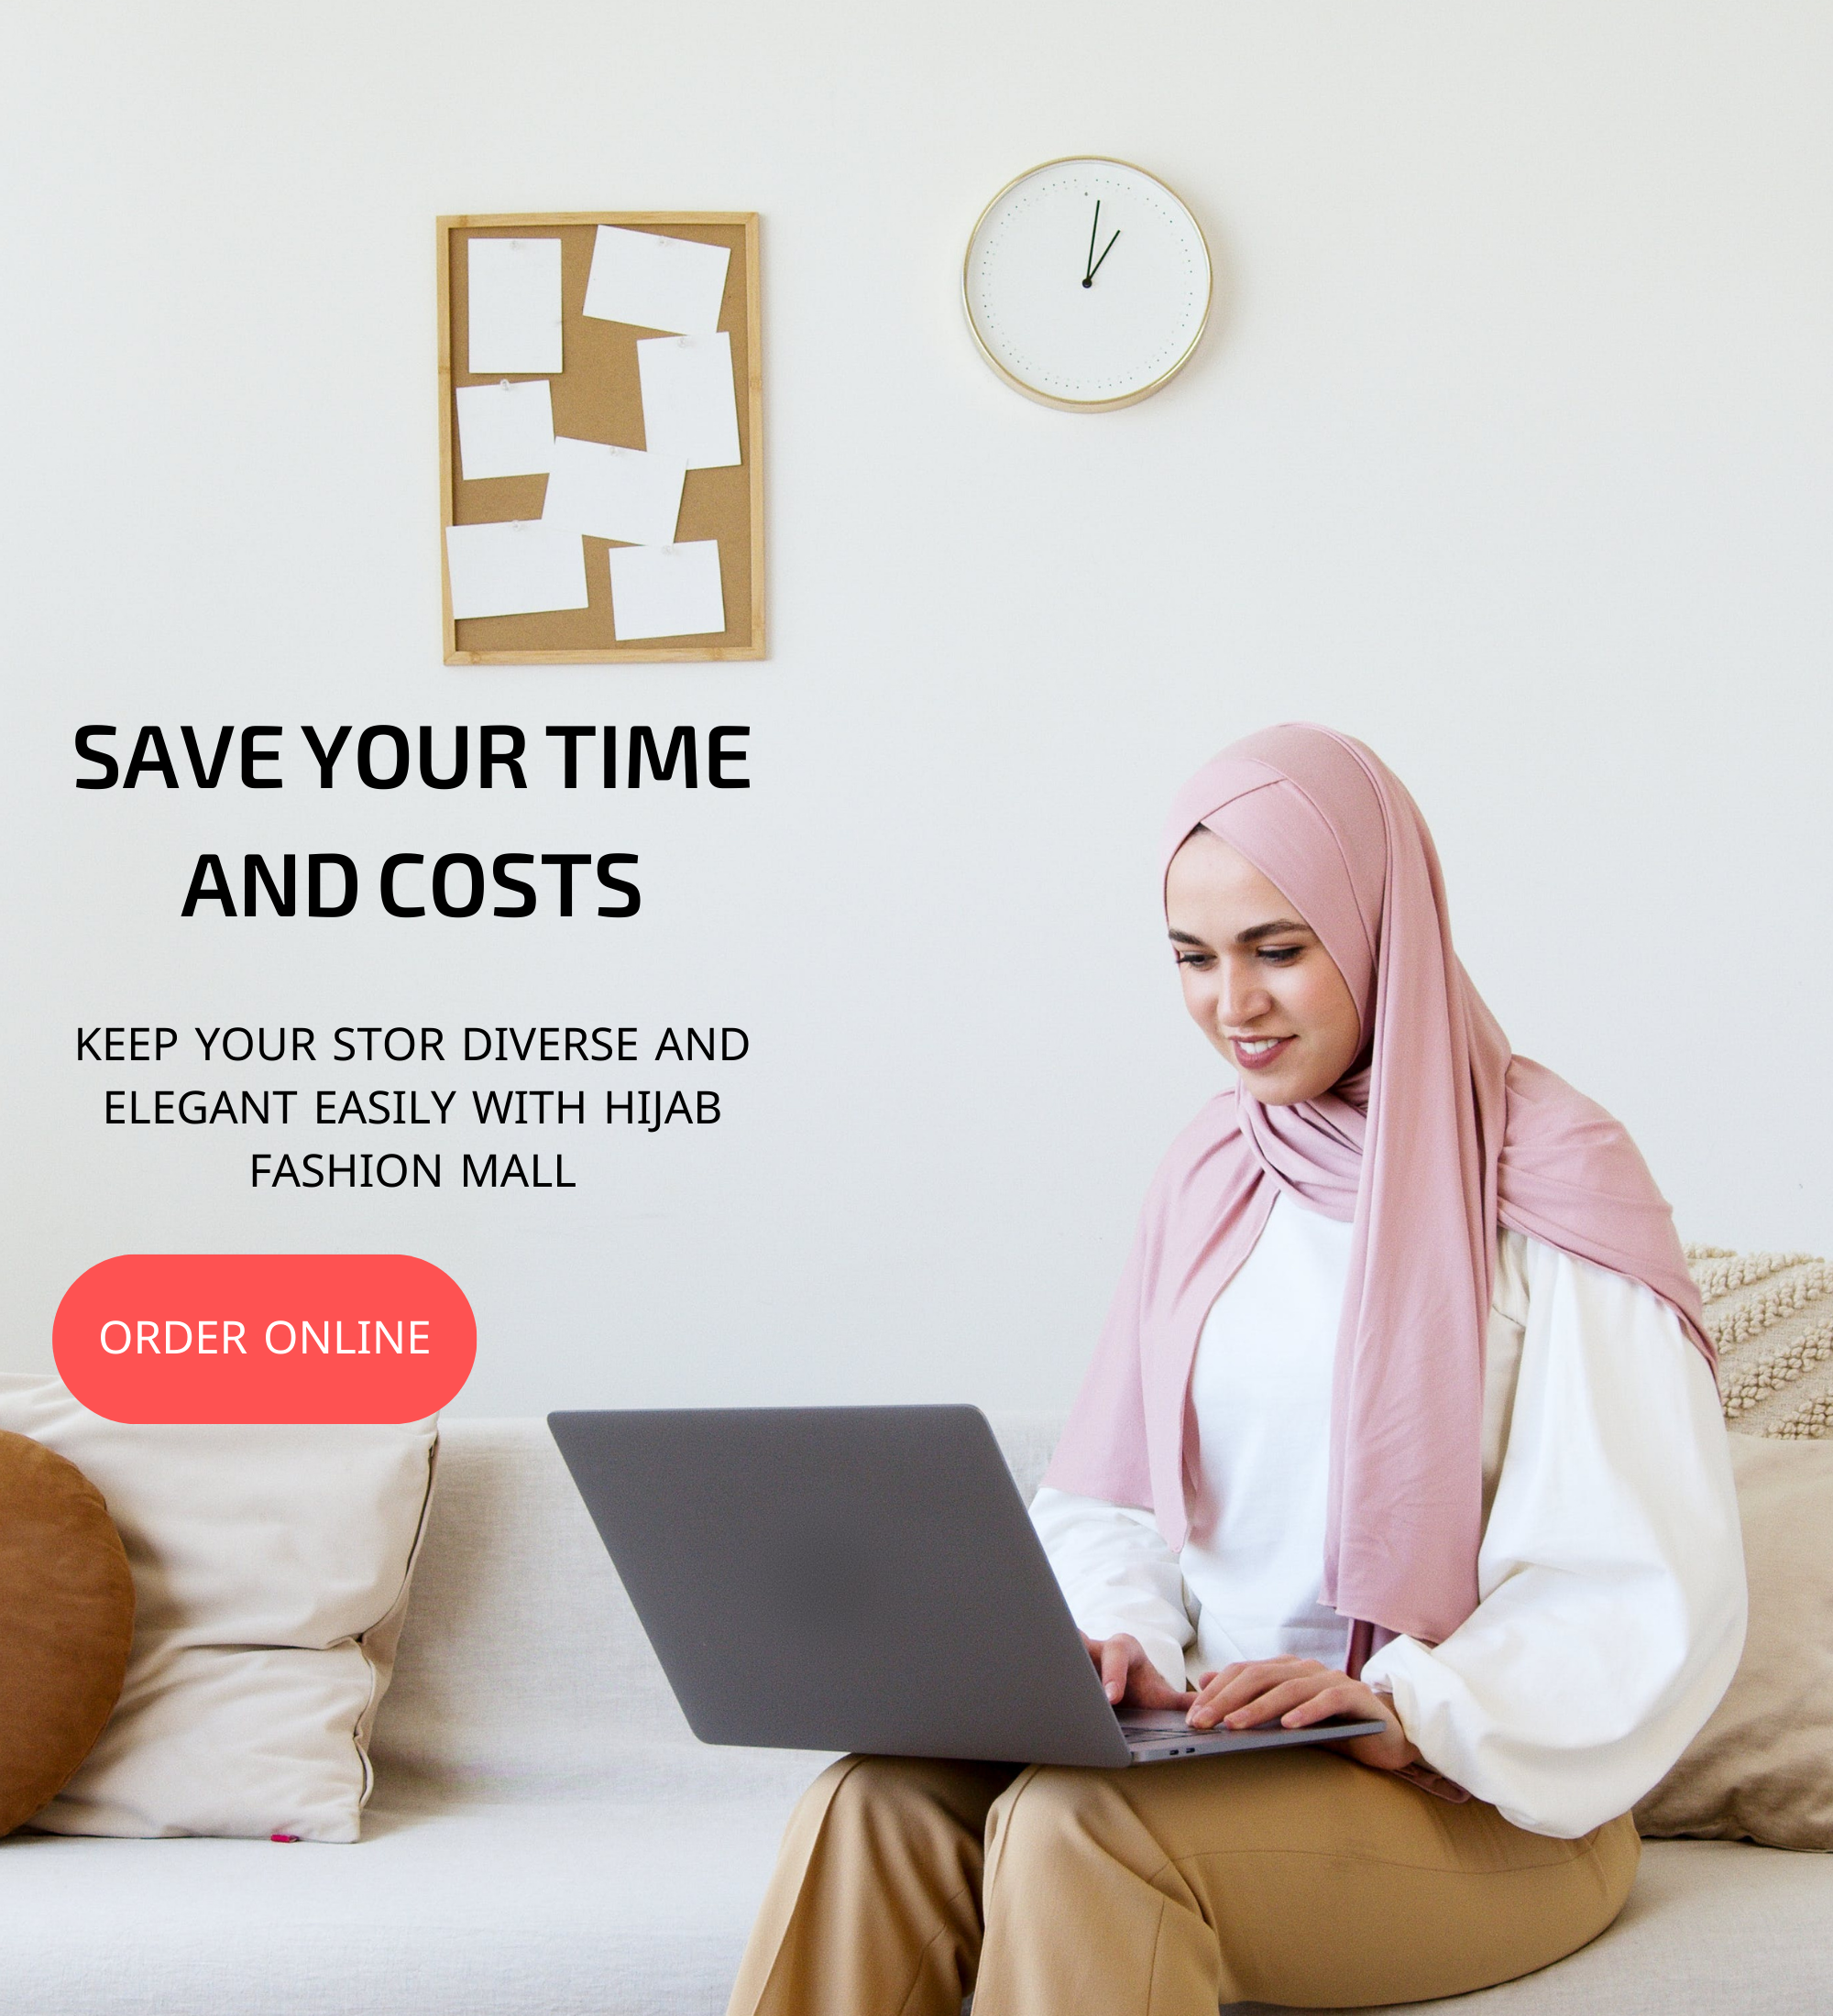 SAVE-YOUR-TIME-AND-COSTS-HIJAB-FASHION-MALL